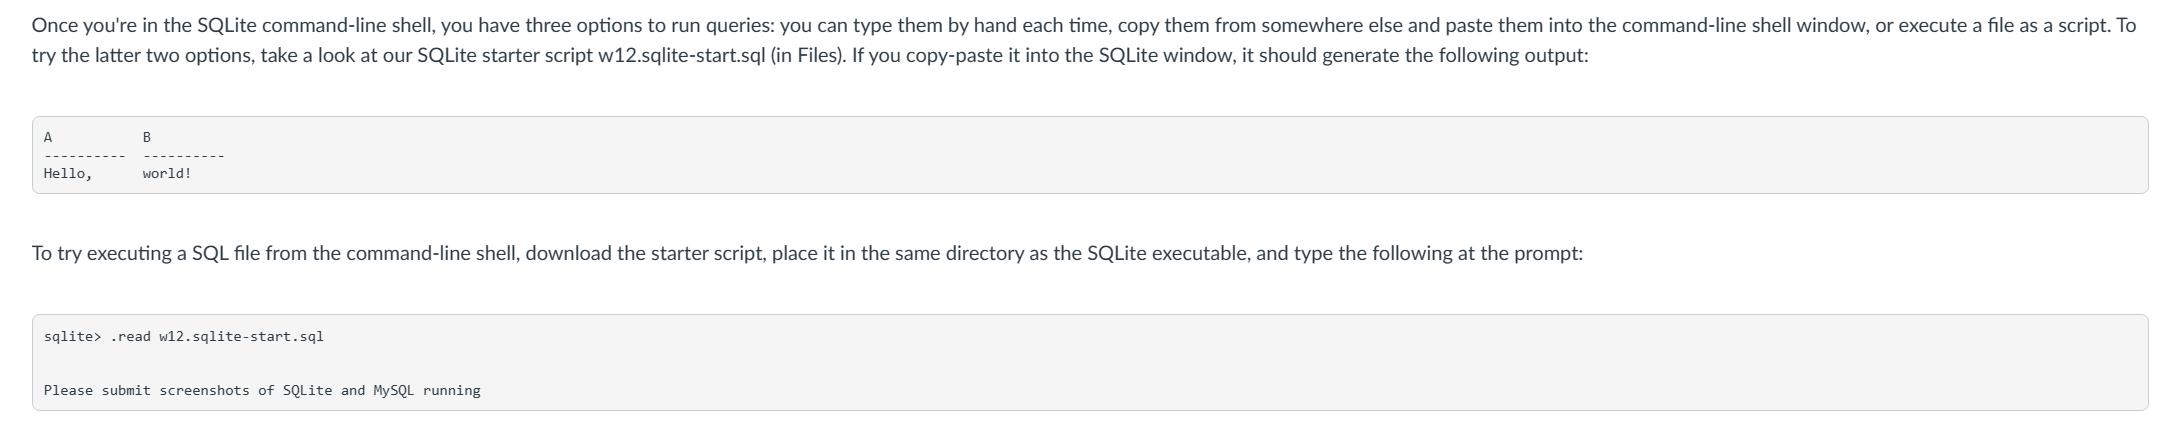 Once you're in the SQLite command-line shell, you have three options to run queries: you can type them by